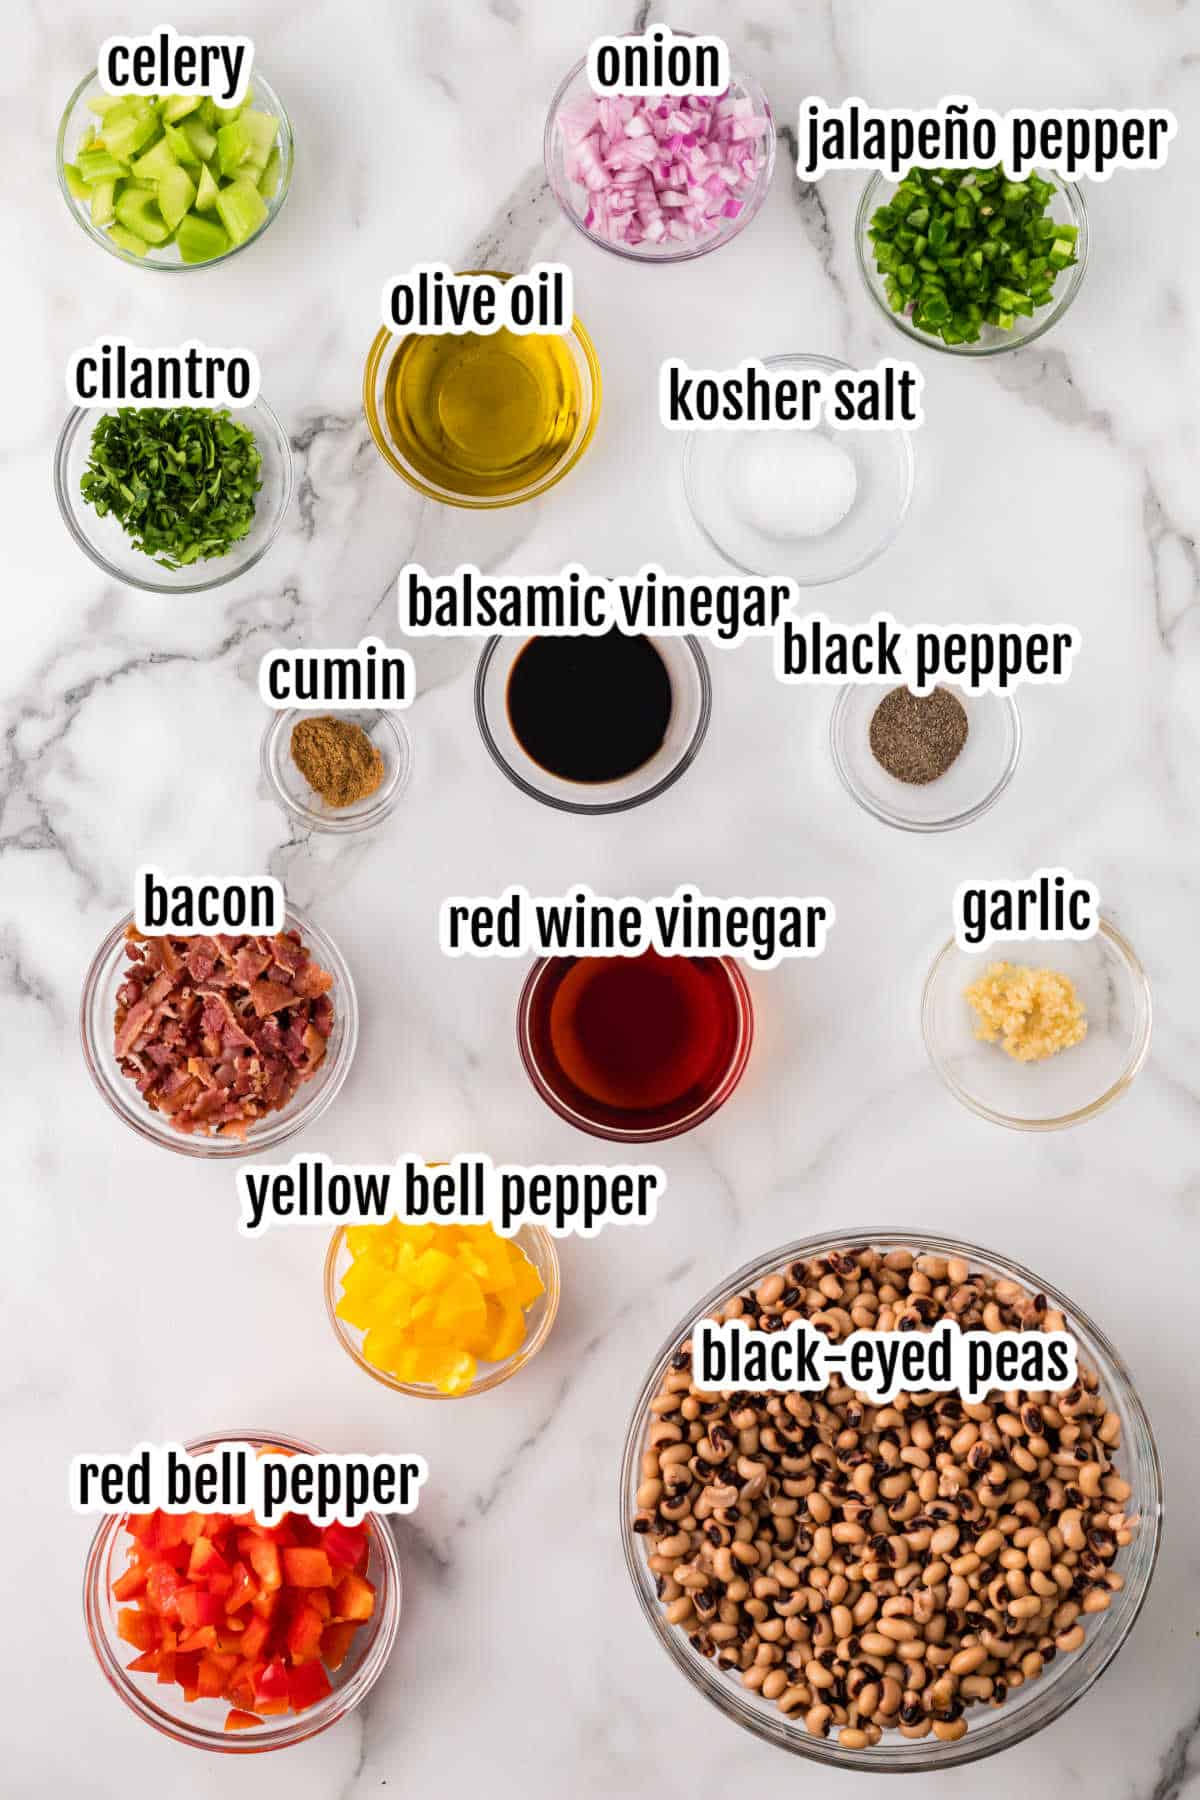 Image of the ingredients needed for the marinated black-eyed peas recipe. 